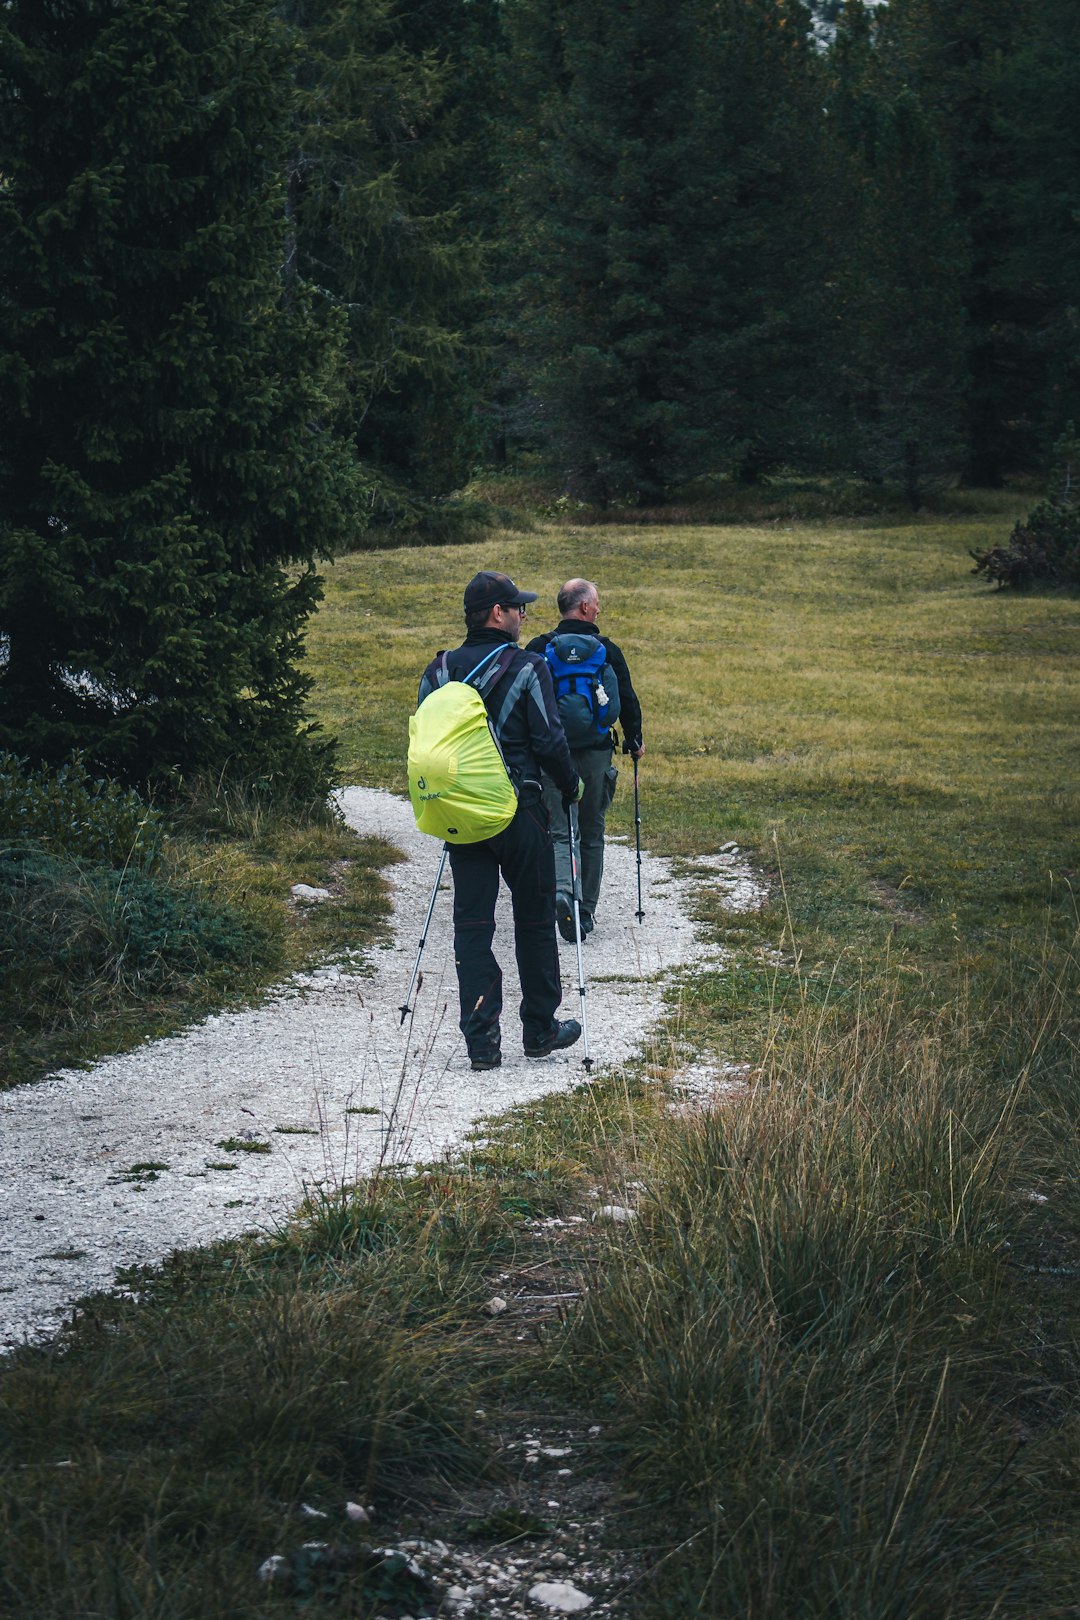 man in blue jacket and yellow backpack walking on dirt road